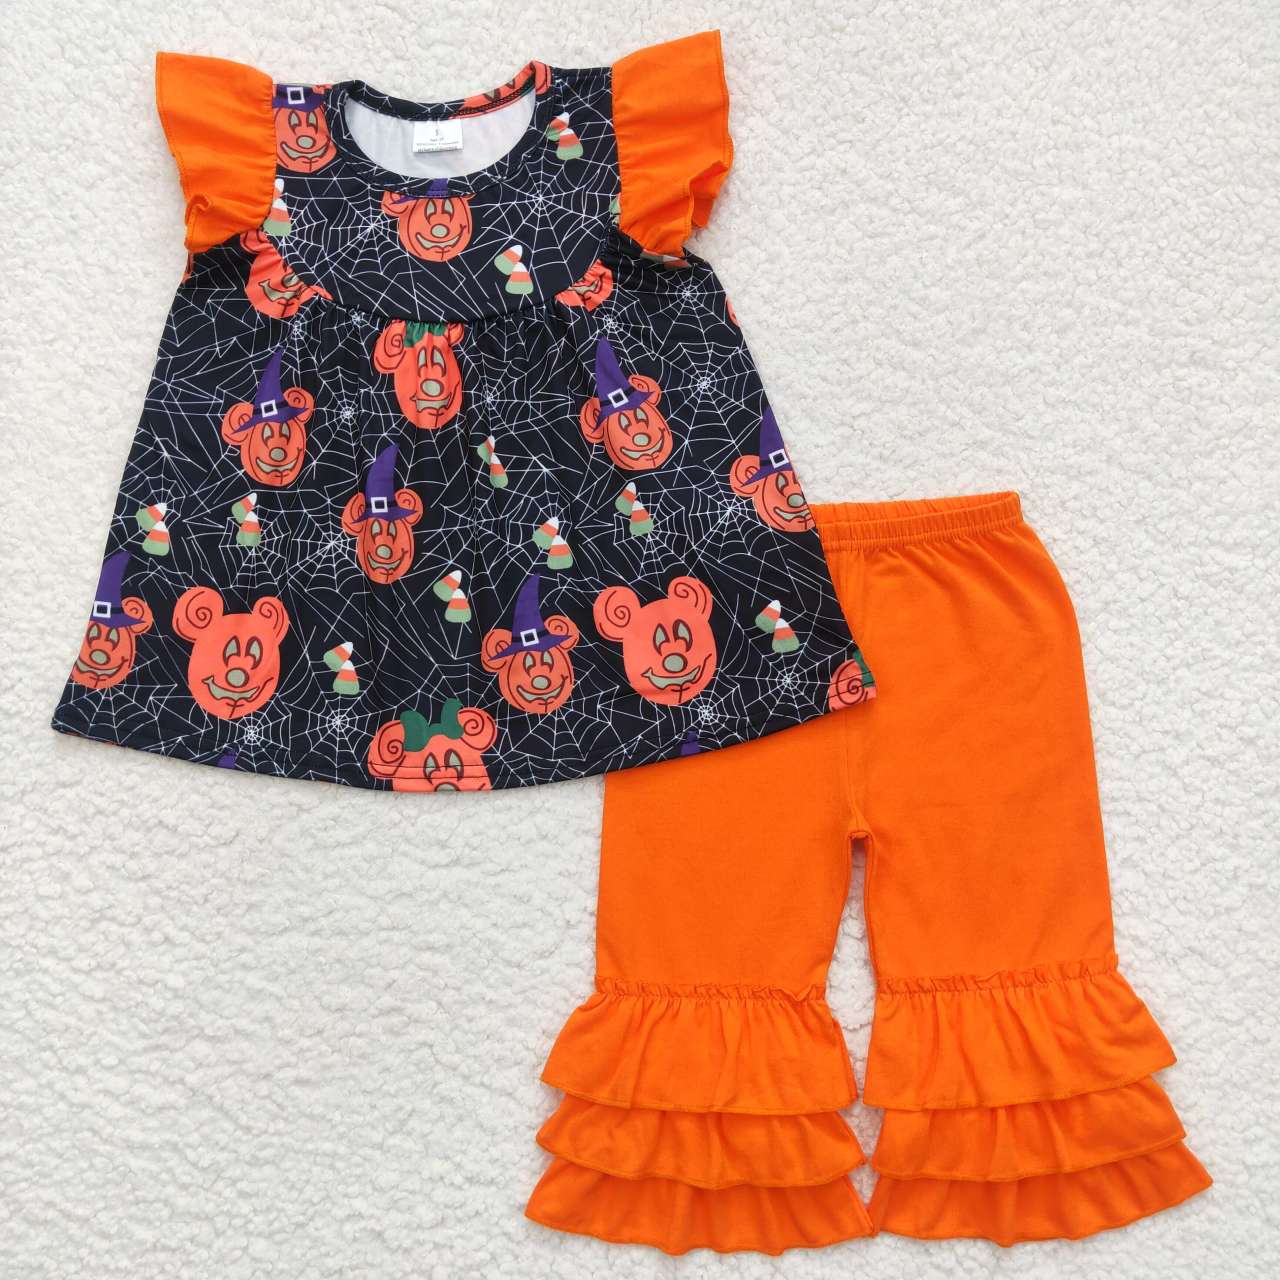 A4-13 baby girl clothes girl halloween outfit